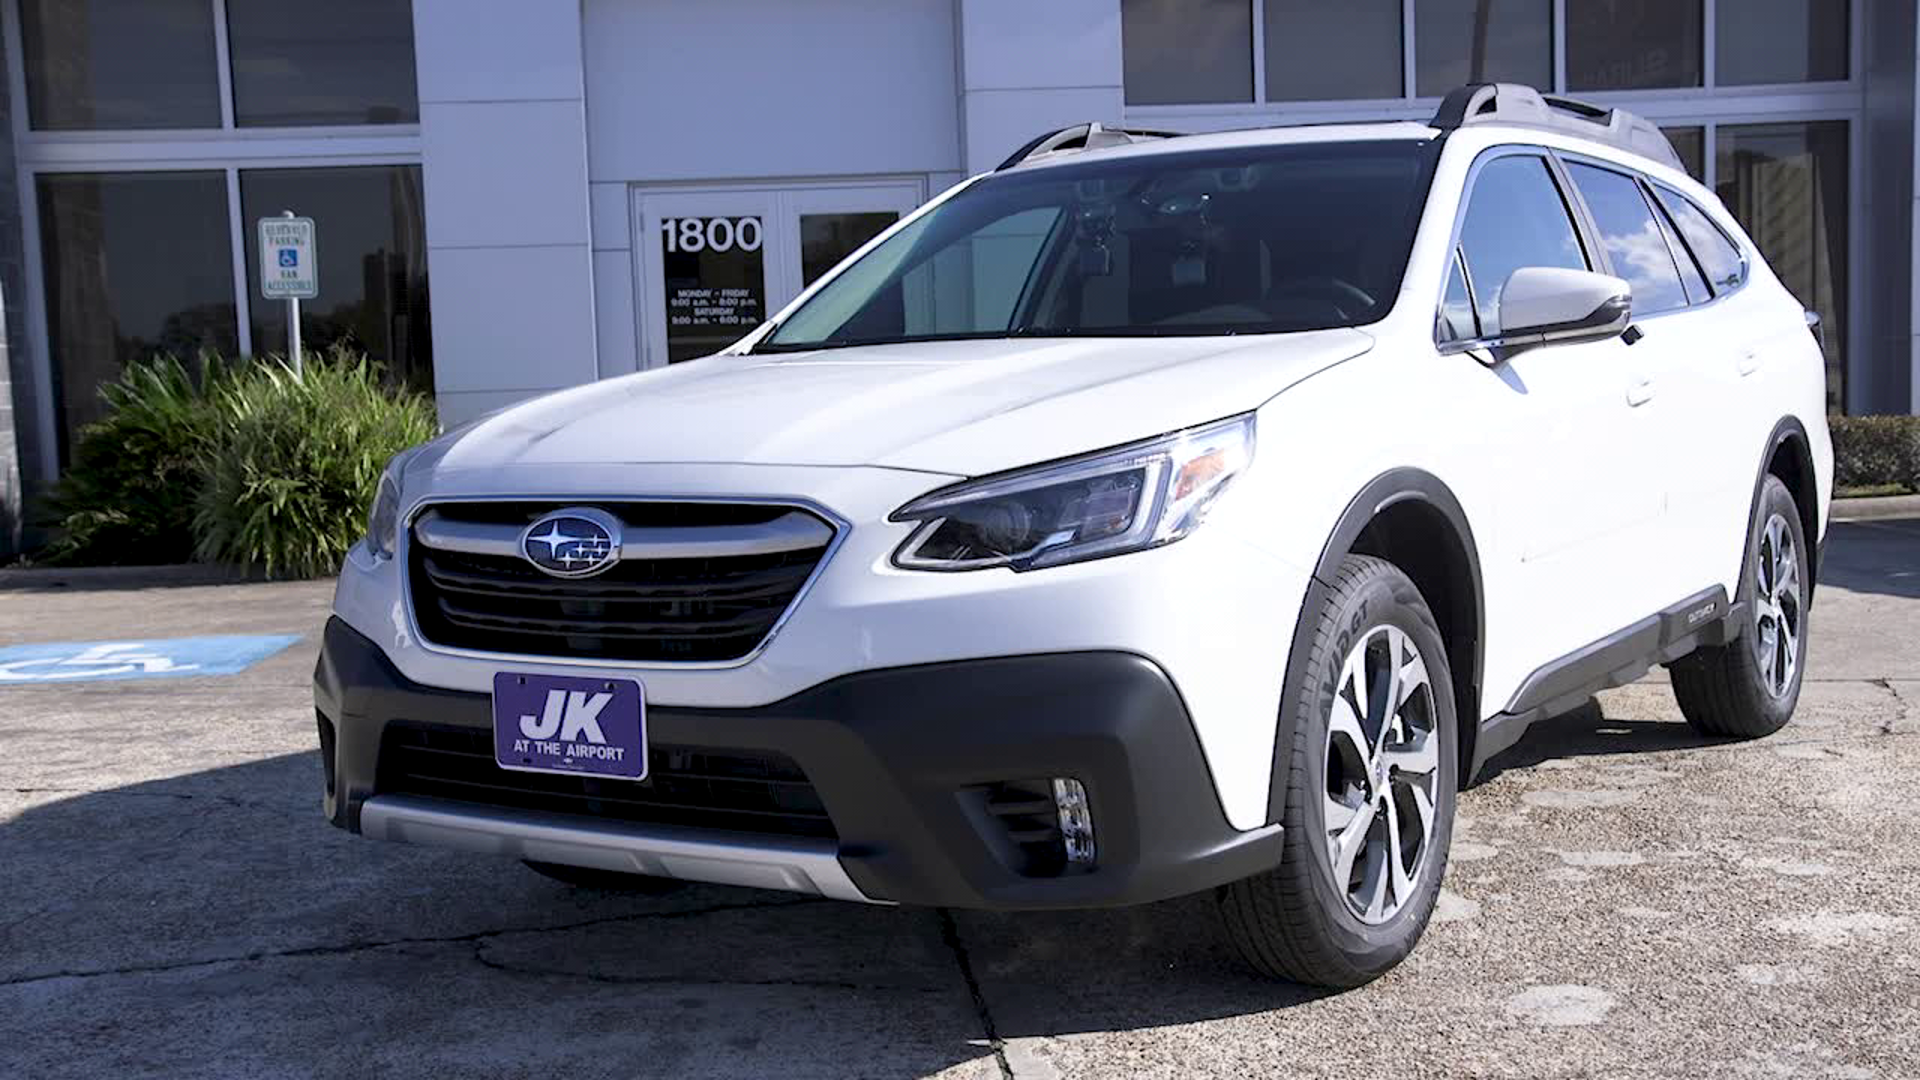 Call (409) 723-1111 or visit http://JKSubaru.com to find out how to get yours.